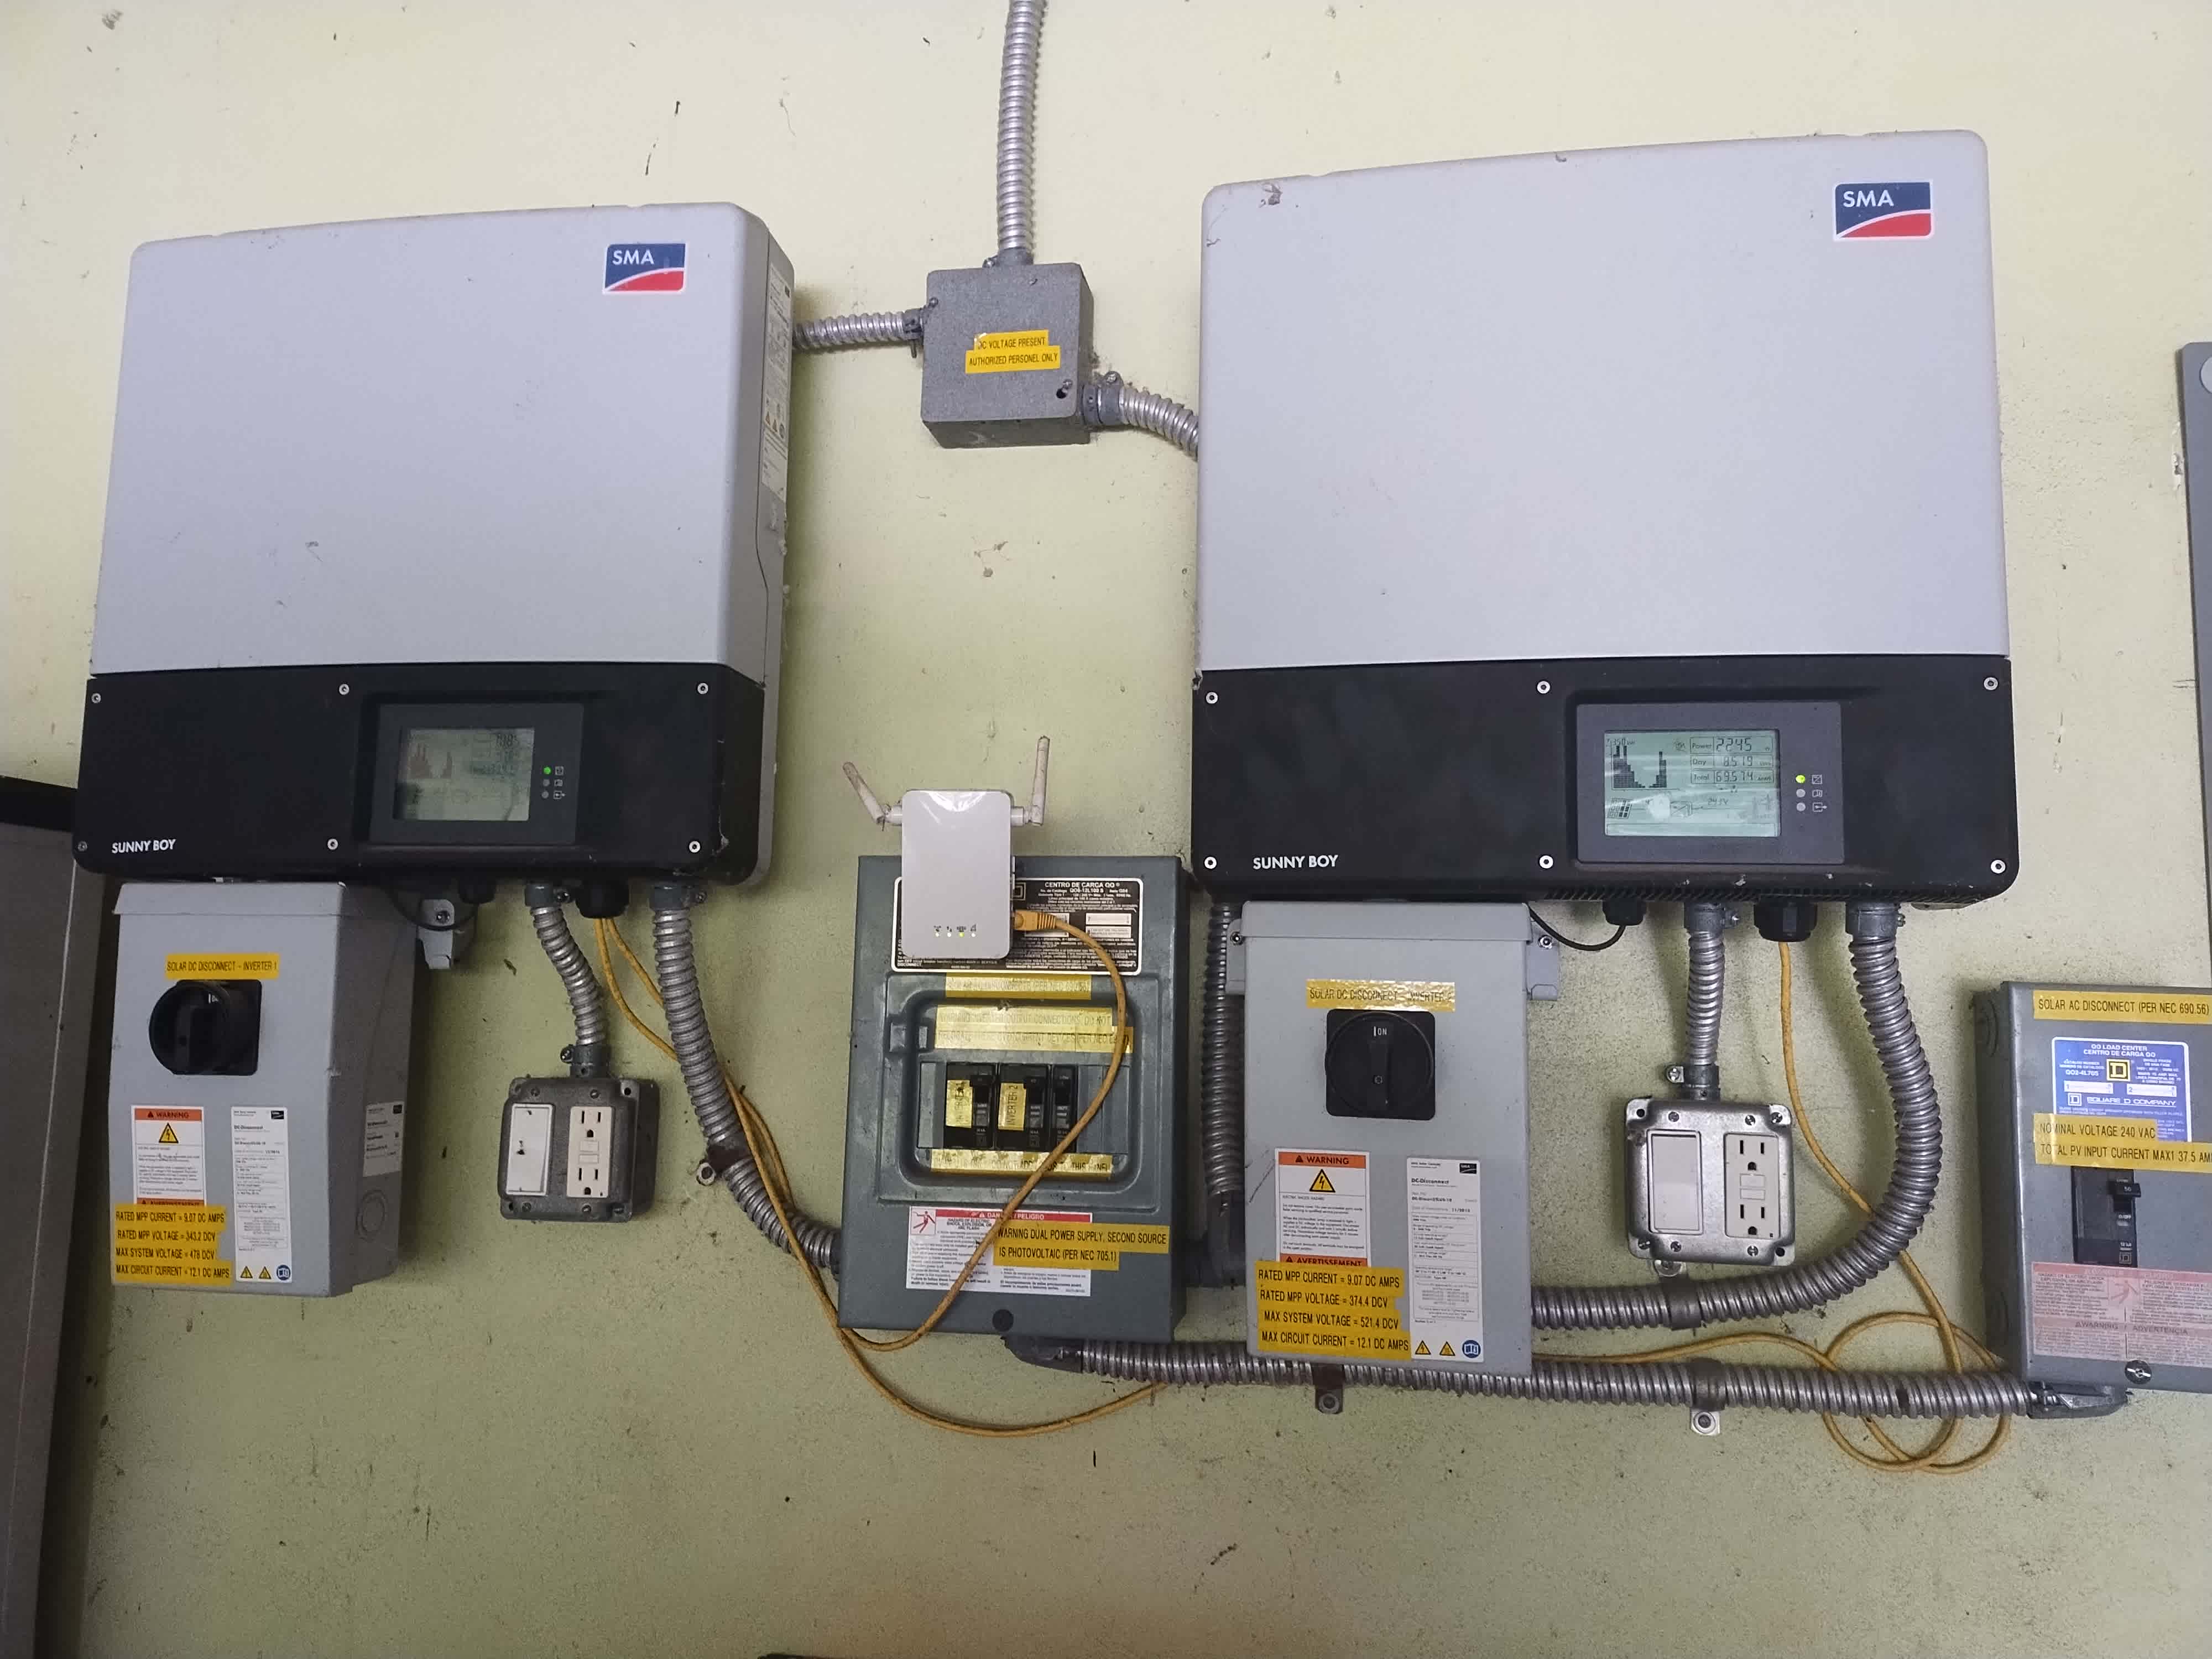 Sunny Boy inverters. Whole house solar- grid tied